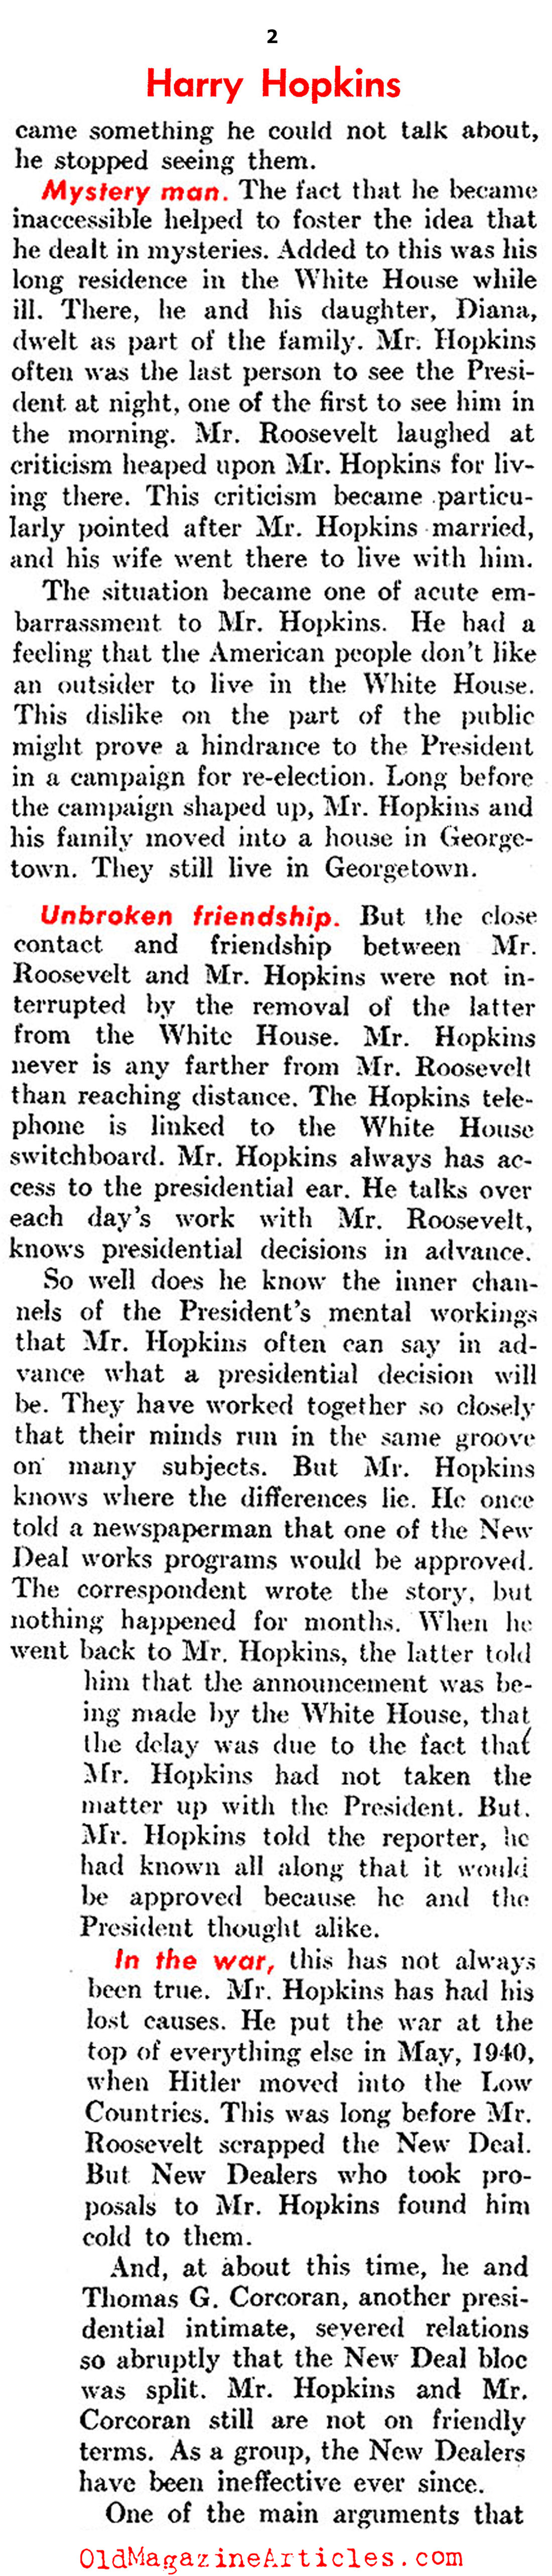 Harry Hopkins - FDR's Right Hand (United States News, 1944)